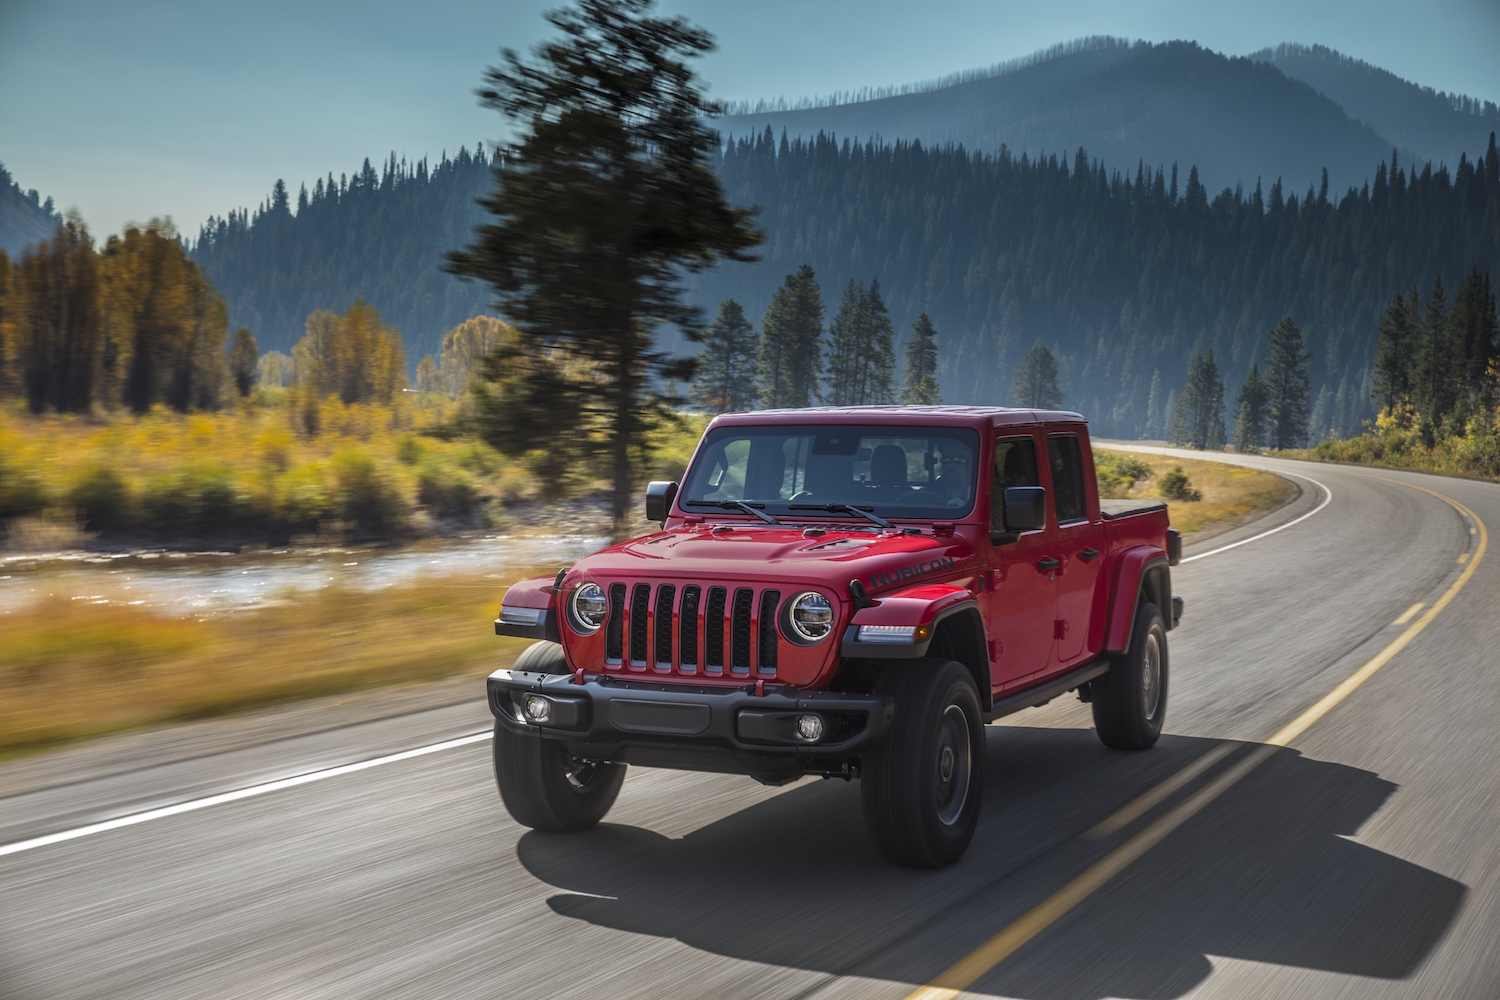 2021 Jeep Gladiator driving through the mountains